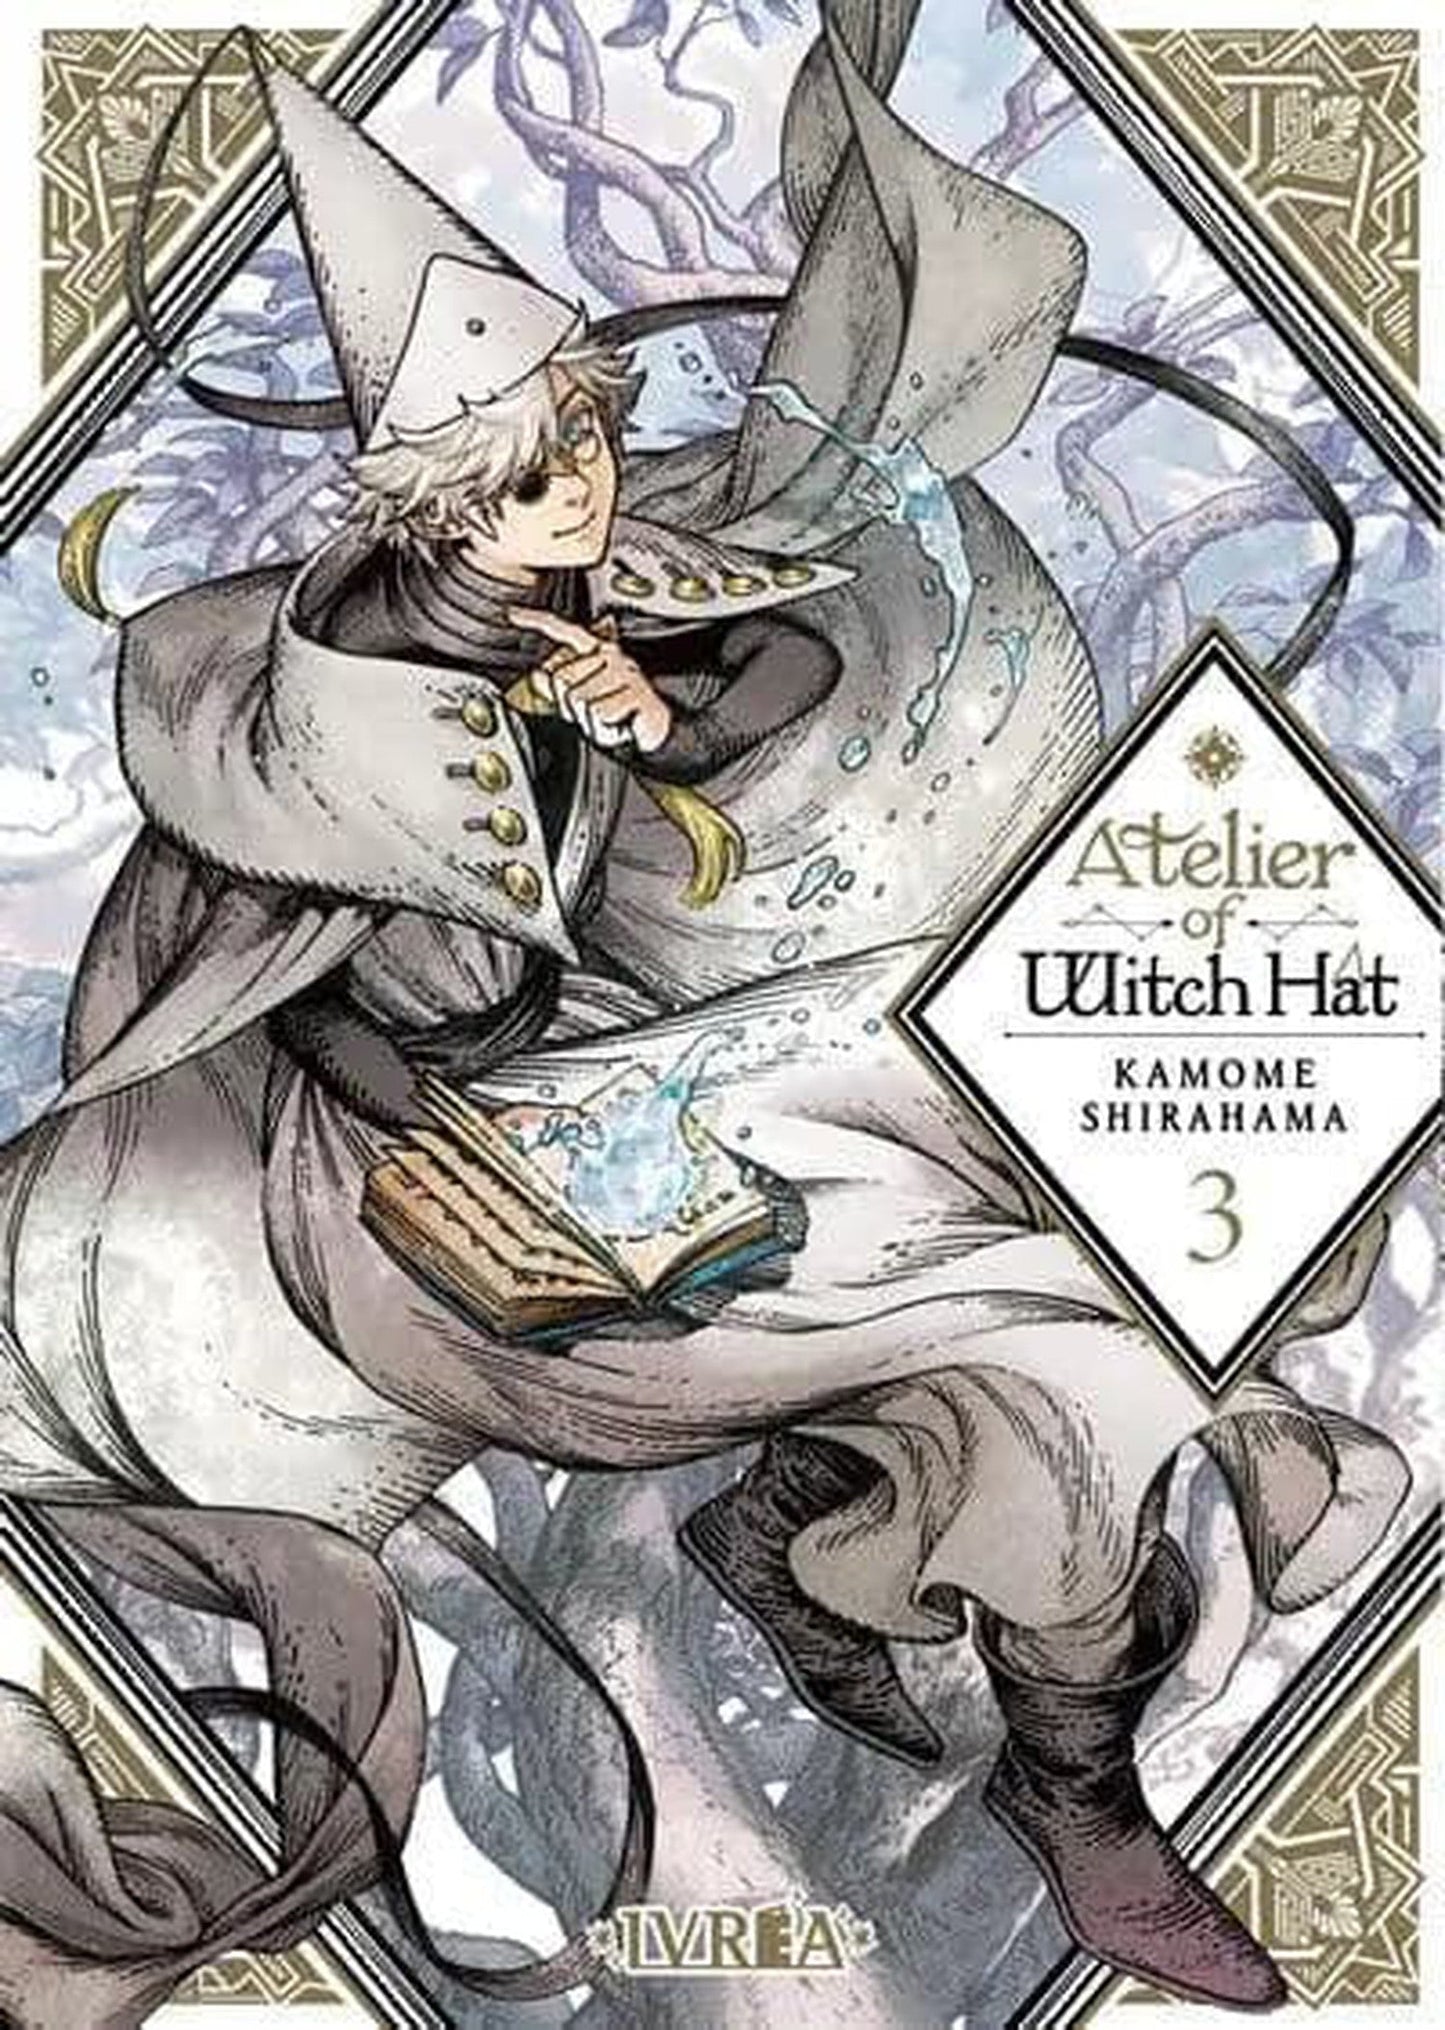 Atelier Of Witch Hat. Vol 3